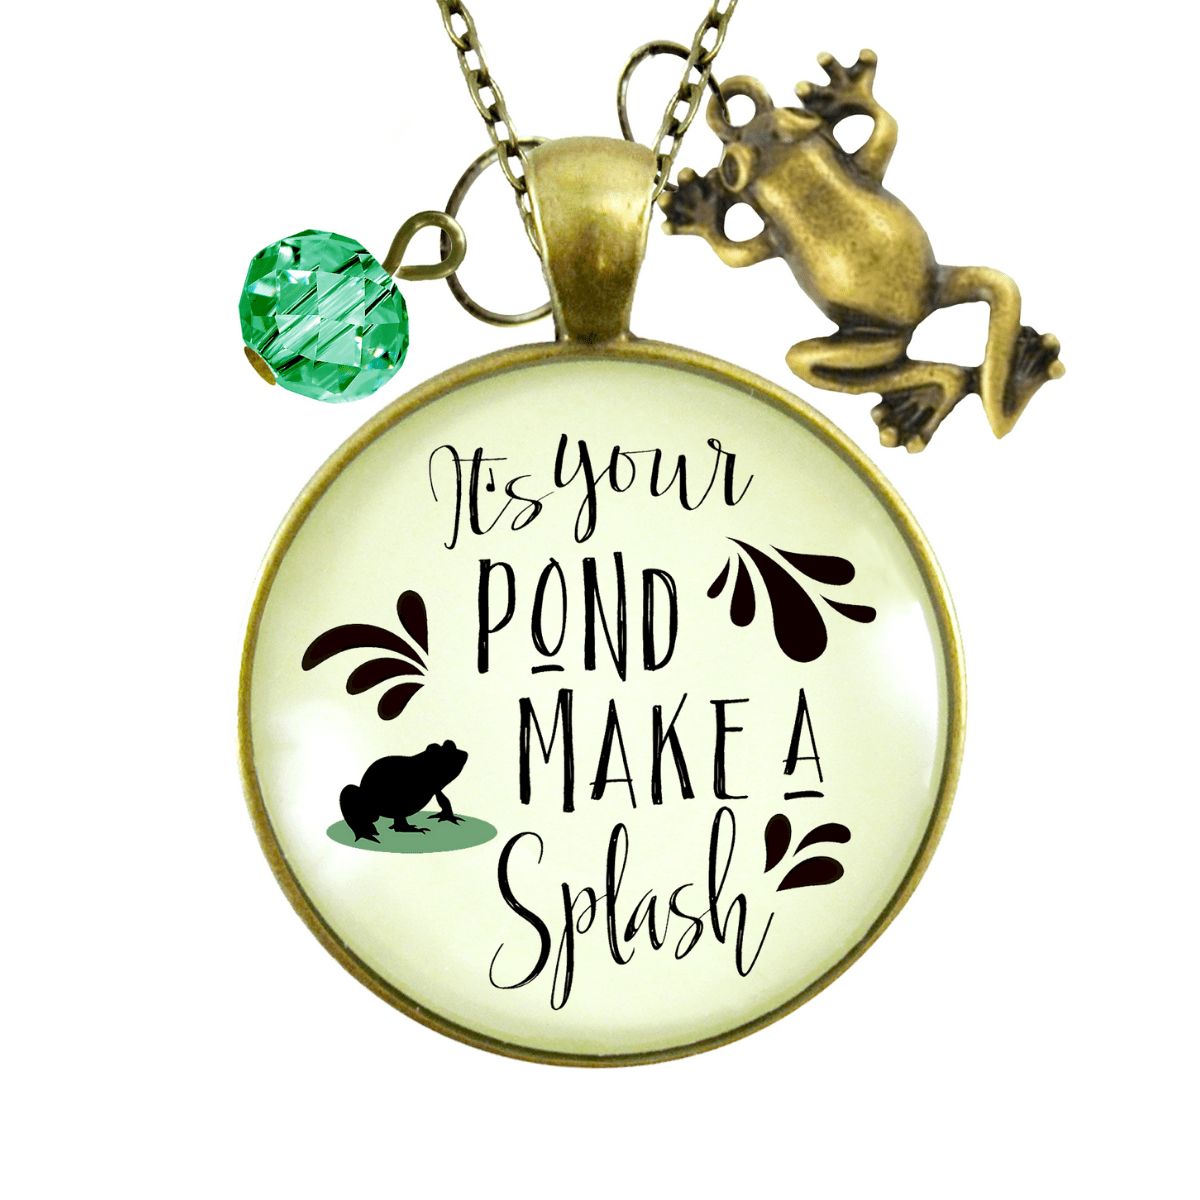 Gutsy Goodness Frog Necklace It's Your Pond Make a Splash Success Life Quote Jewelry - Gutsy Goodness Handmade Jewelry;Frog Necklace It's Your Pond Make A Splash Success Life Quote Jewelry - Gutsy Goodness Handmade Jewelry Gifts